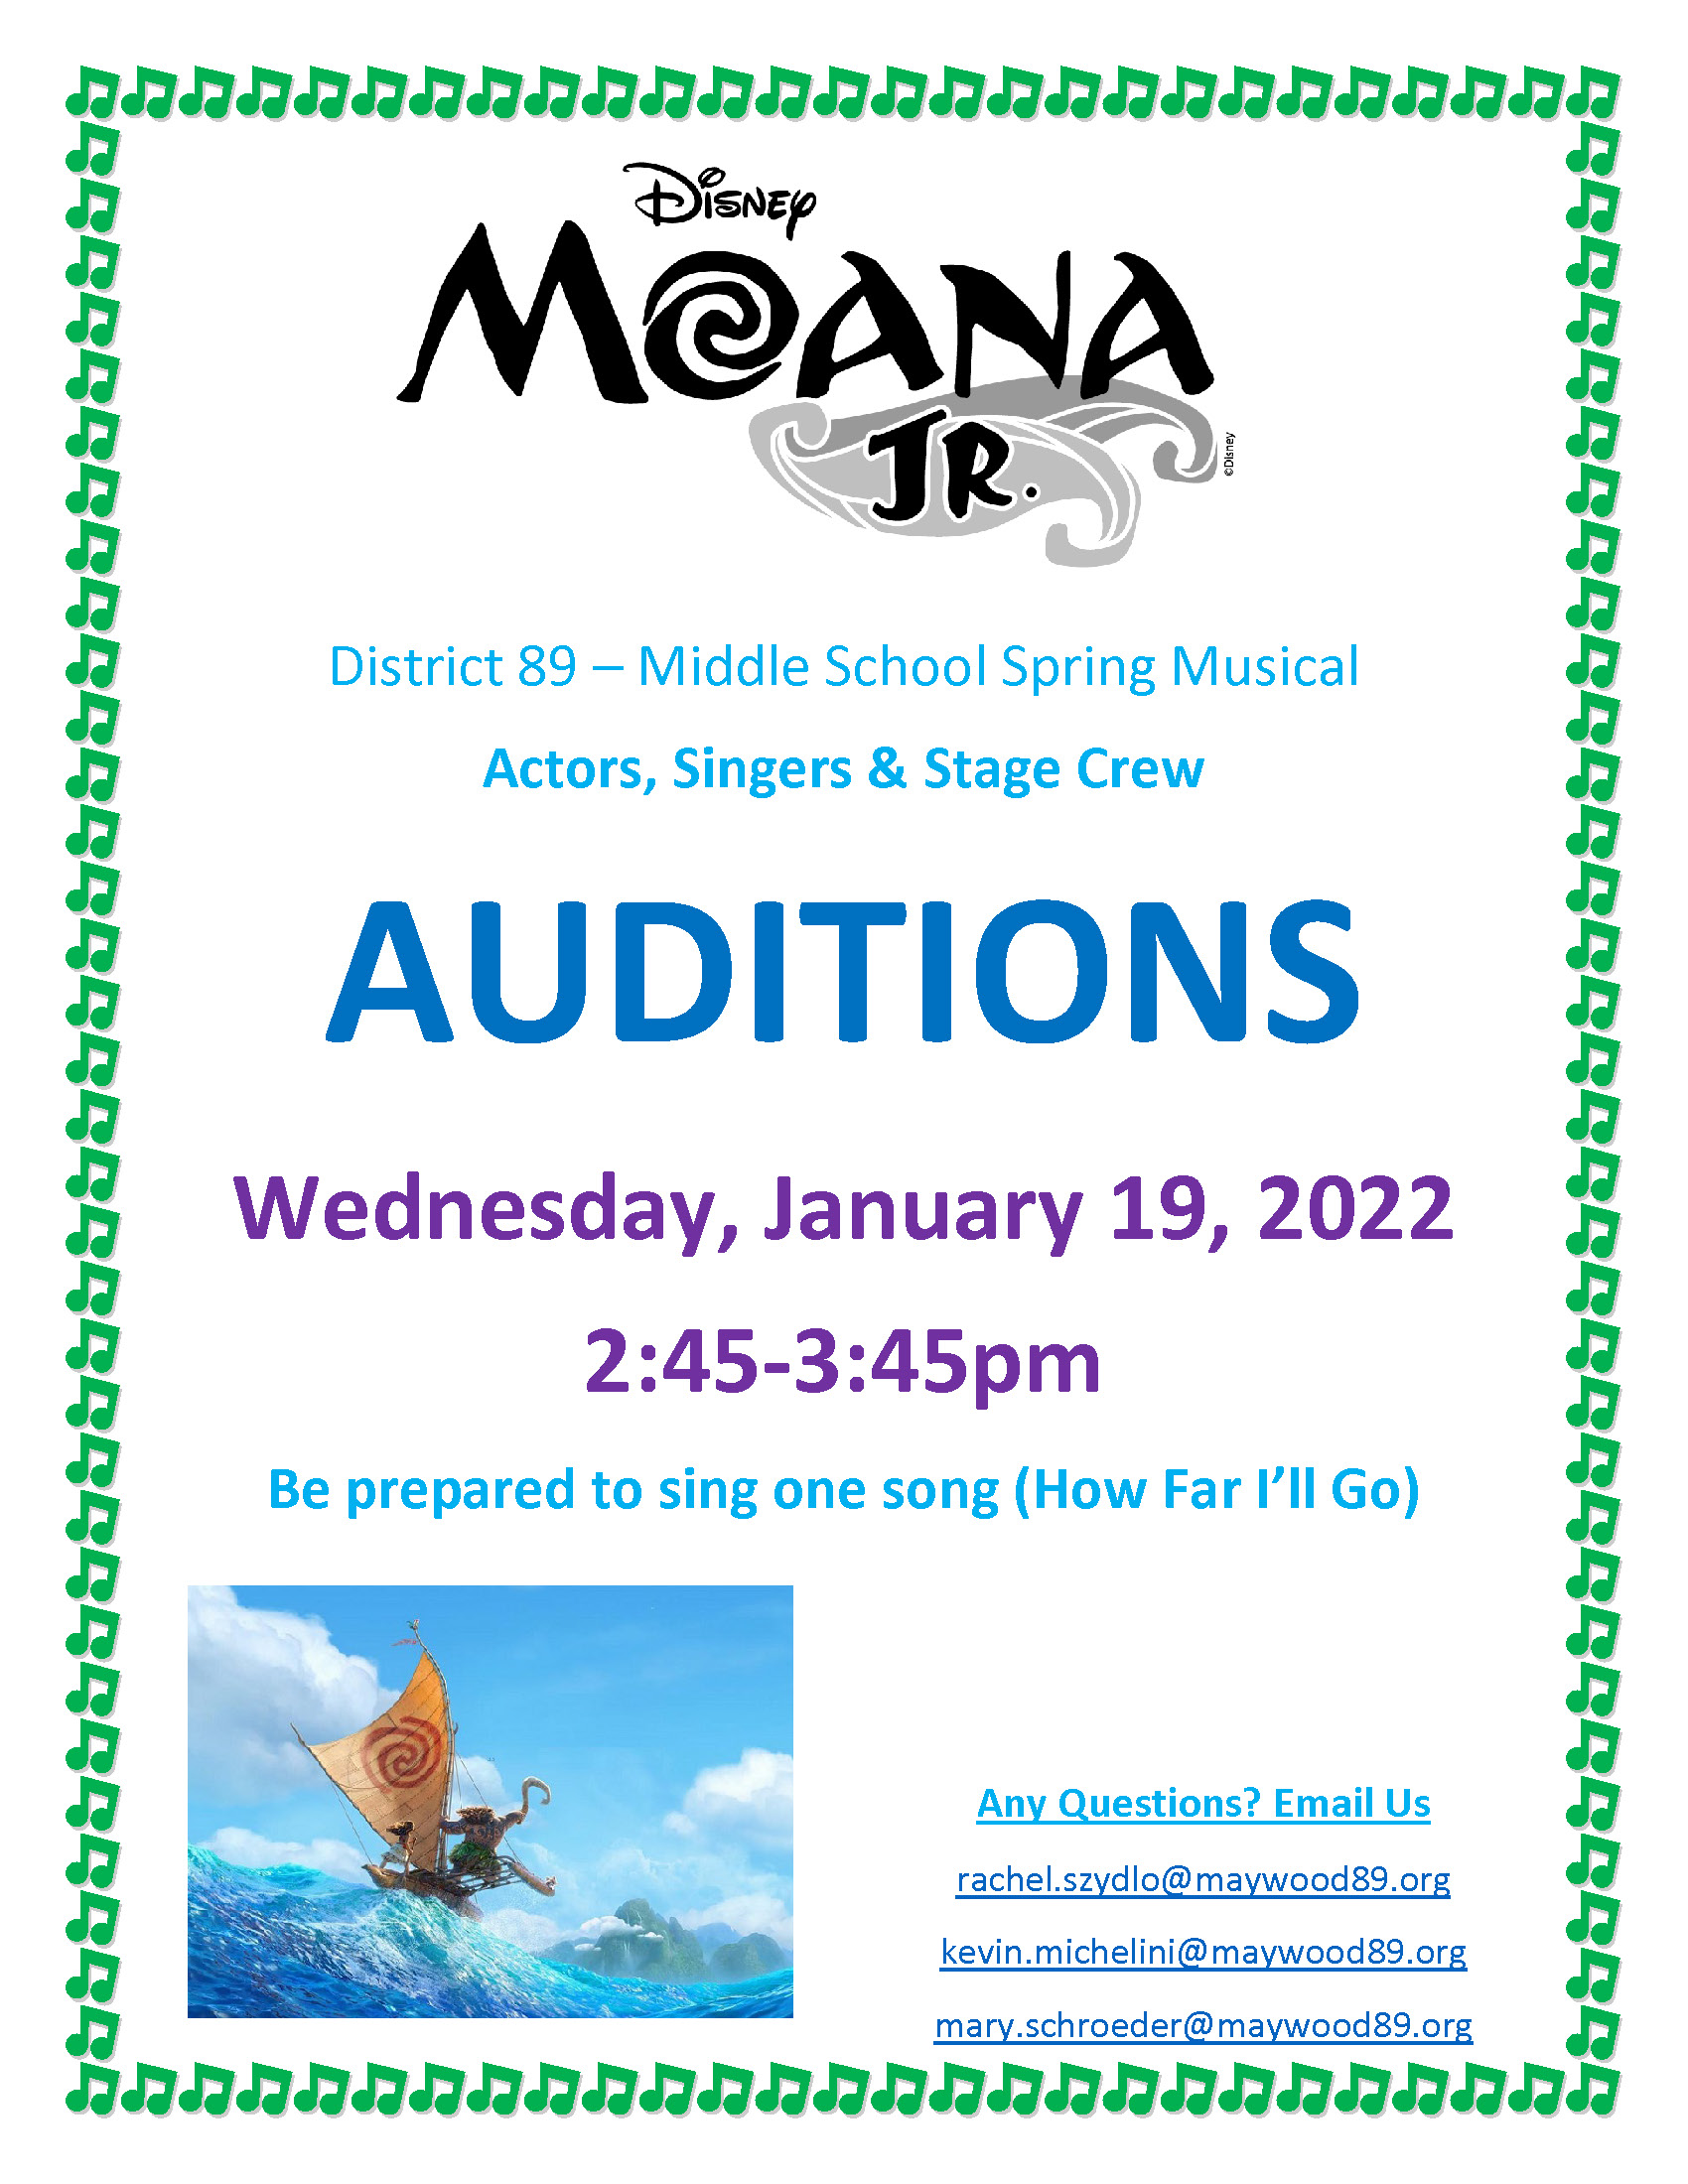 SMS auditions flyer